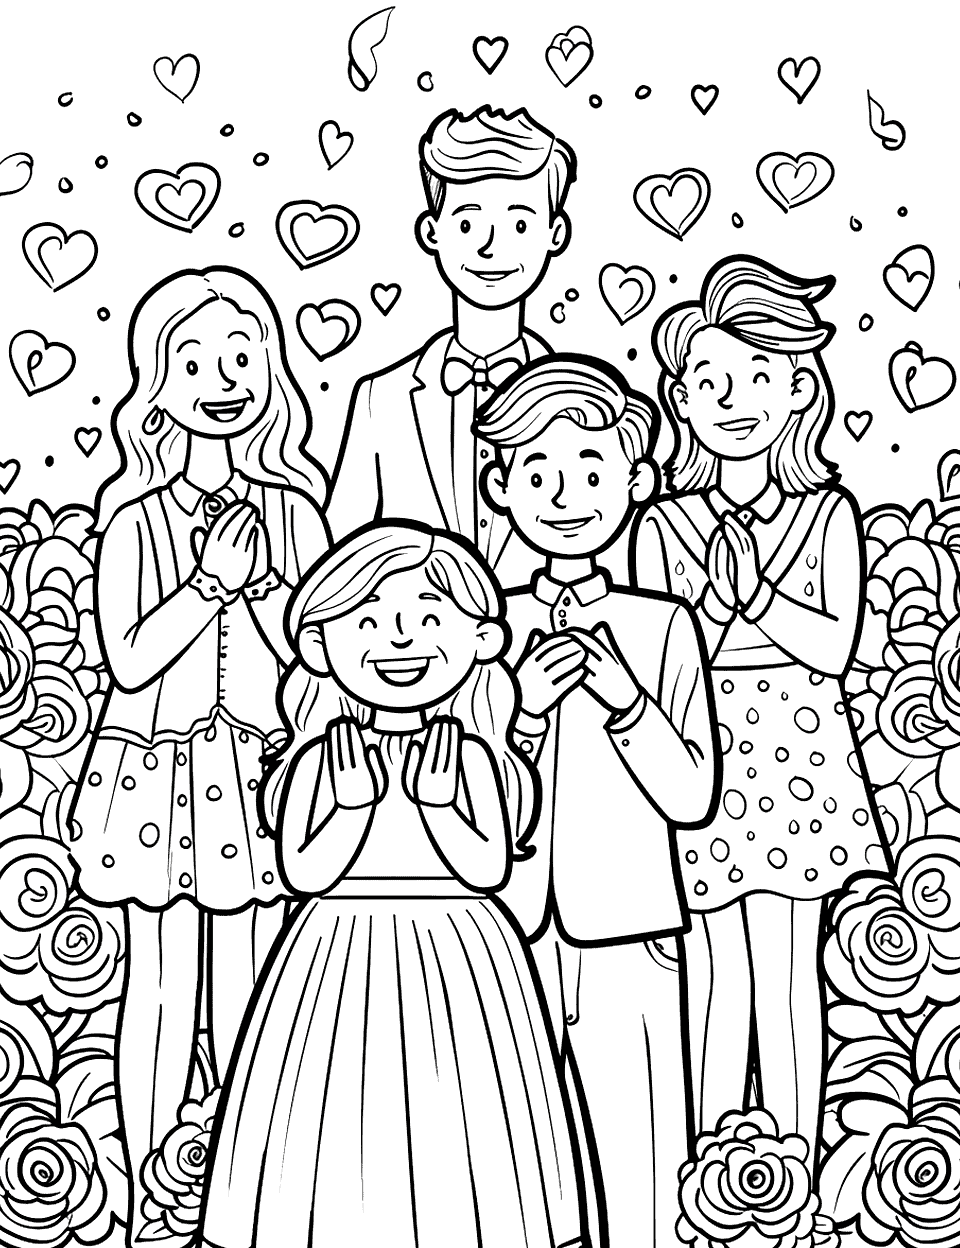 Wedding Guest Joy Coloring Page - Children and adults in festive attire, clapping and smiling at the ceremony.